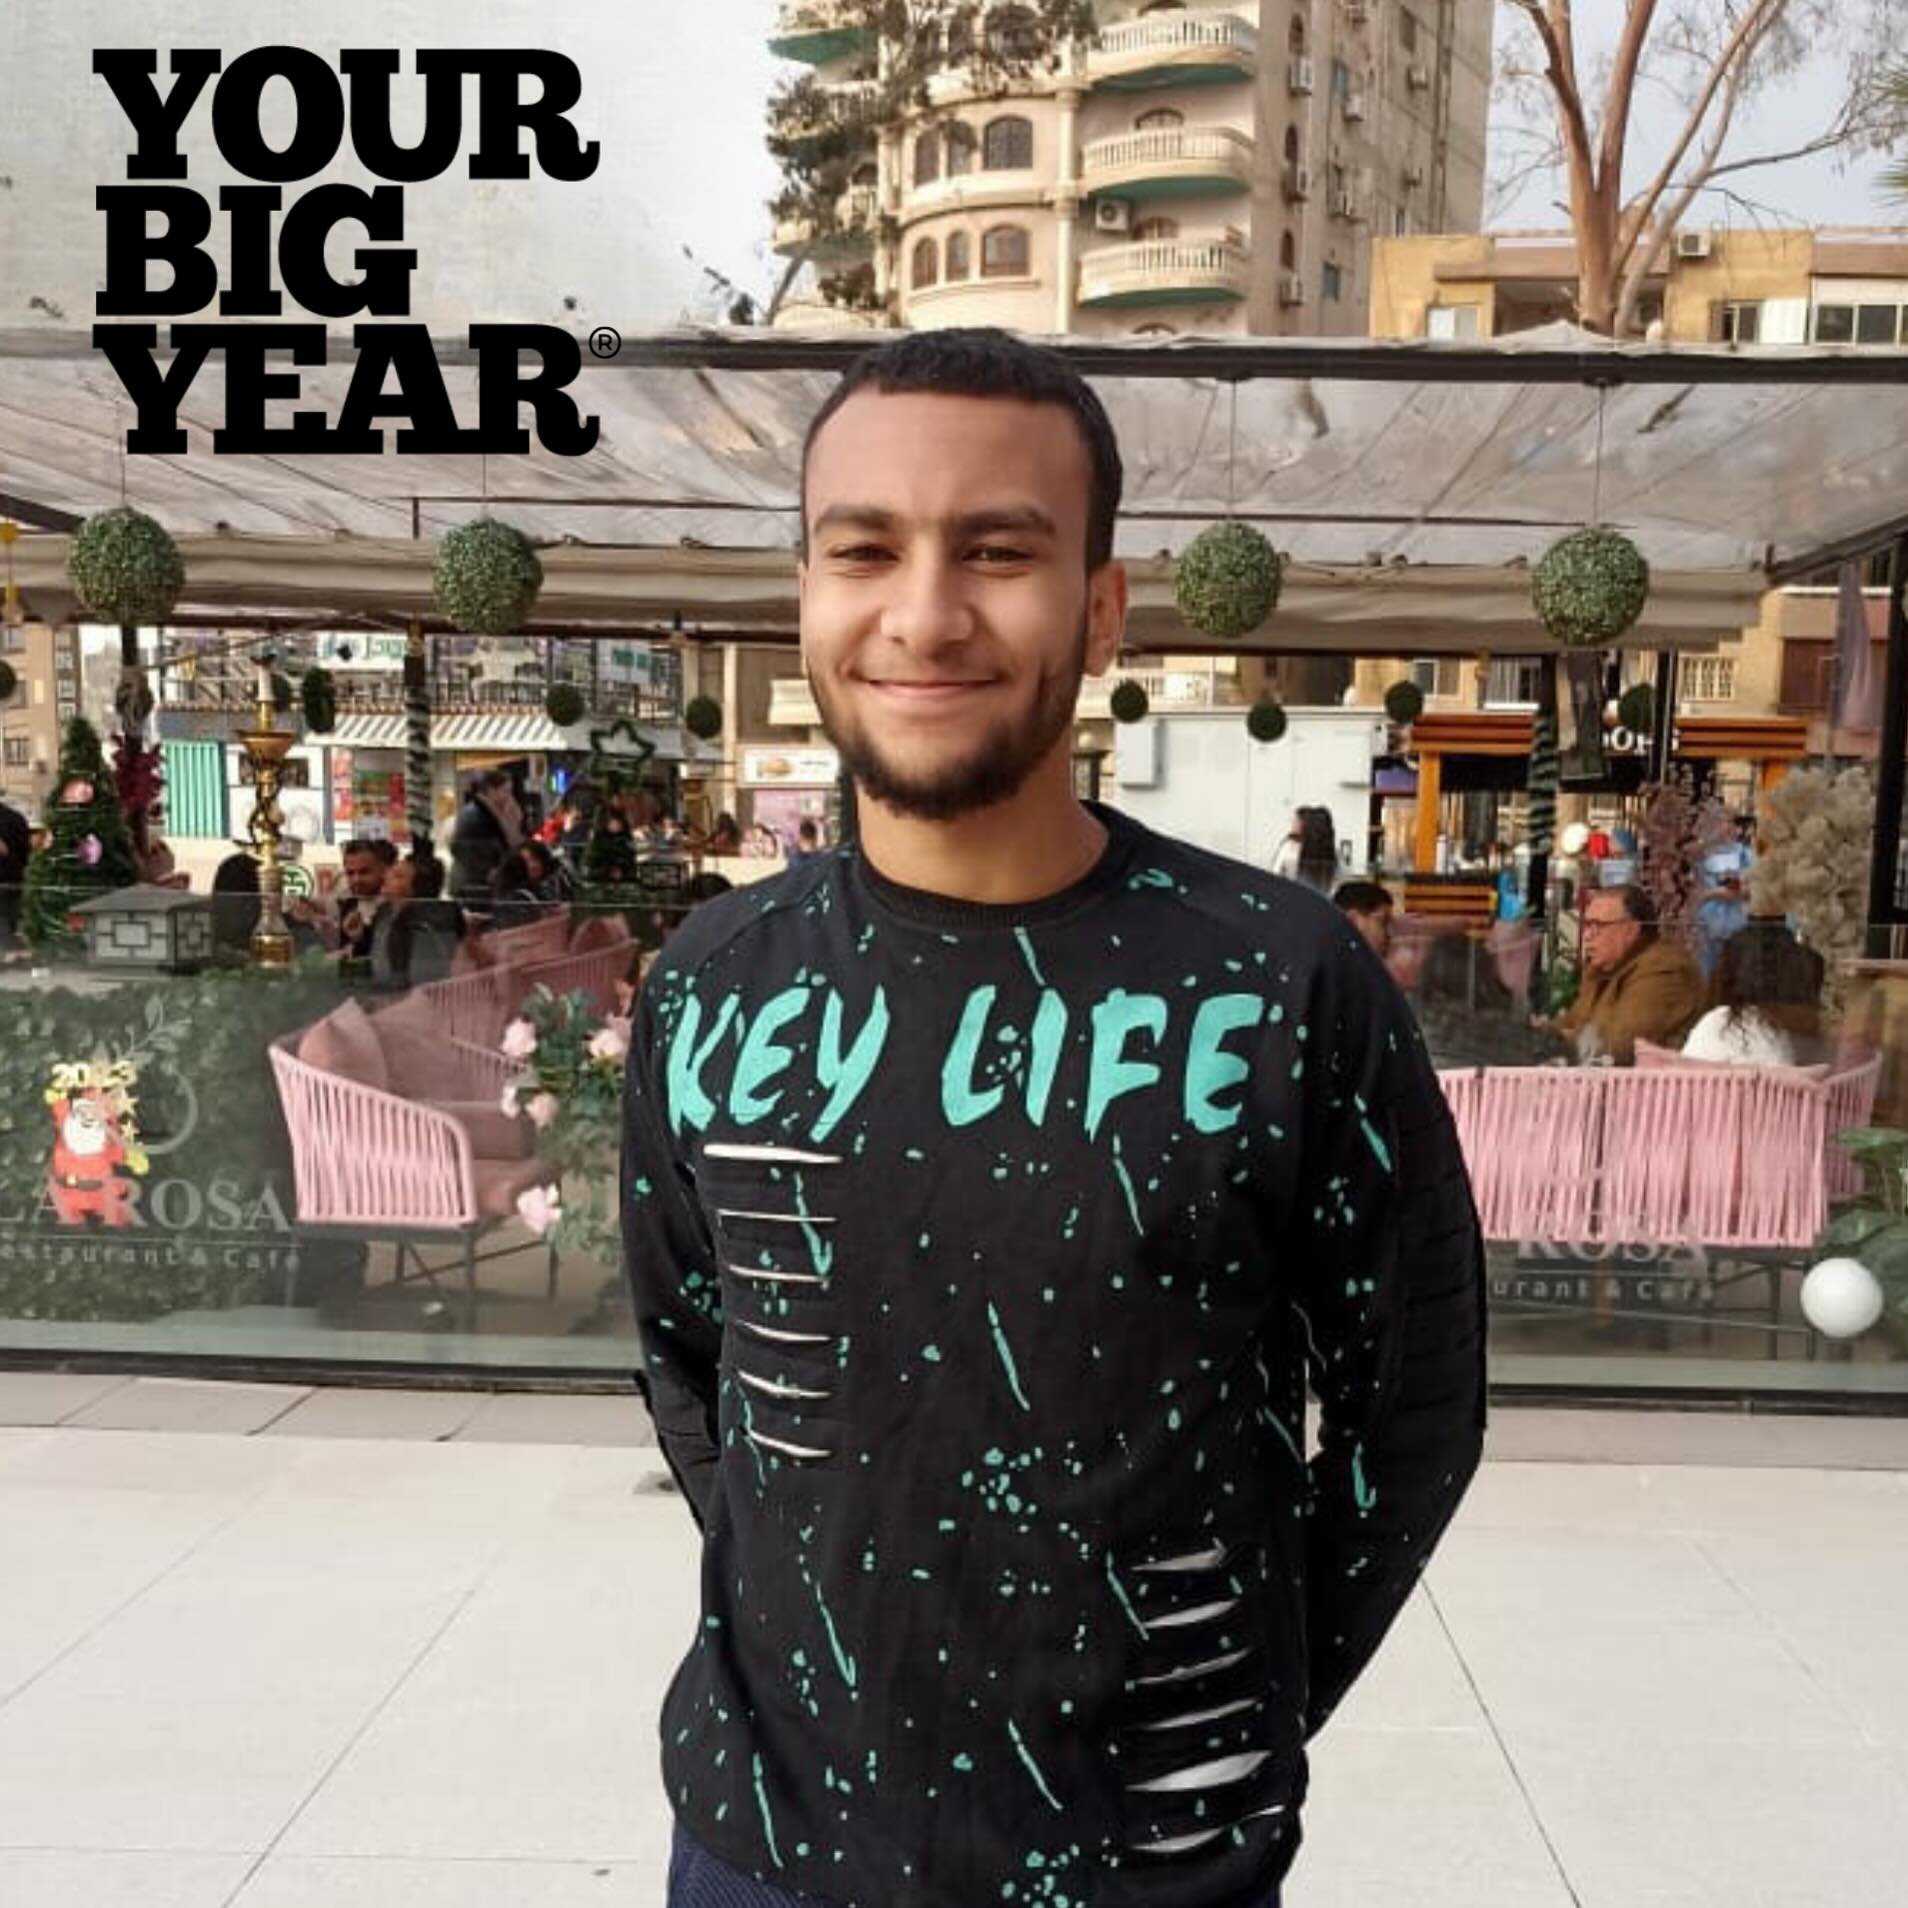 Say hi to Abanoub, our passionate Make an Impact Fellow from Egypt! 🌍 The land of the Nile, where civilization flourished and gave birth to numerous sciences. 

Abanoub shares his heartfelt desire to see Egypt reclaim its golden age, trusting in the